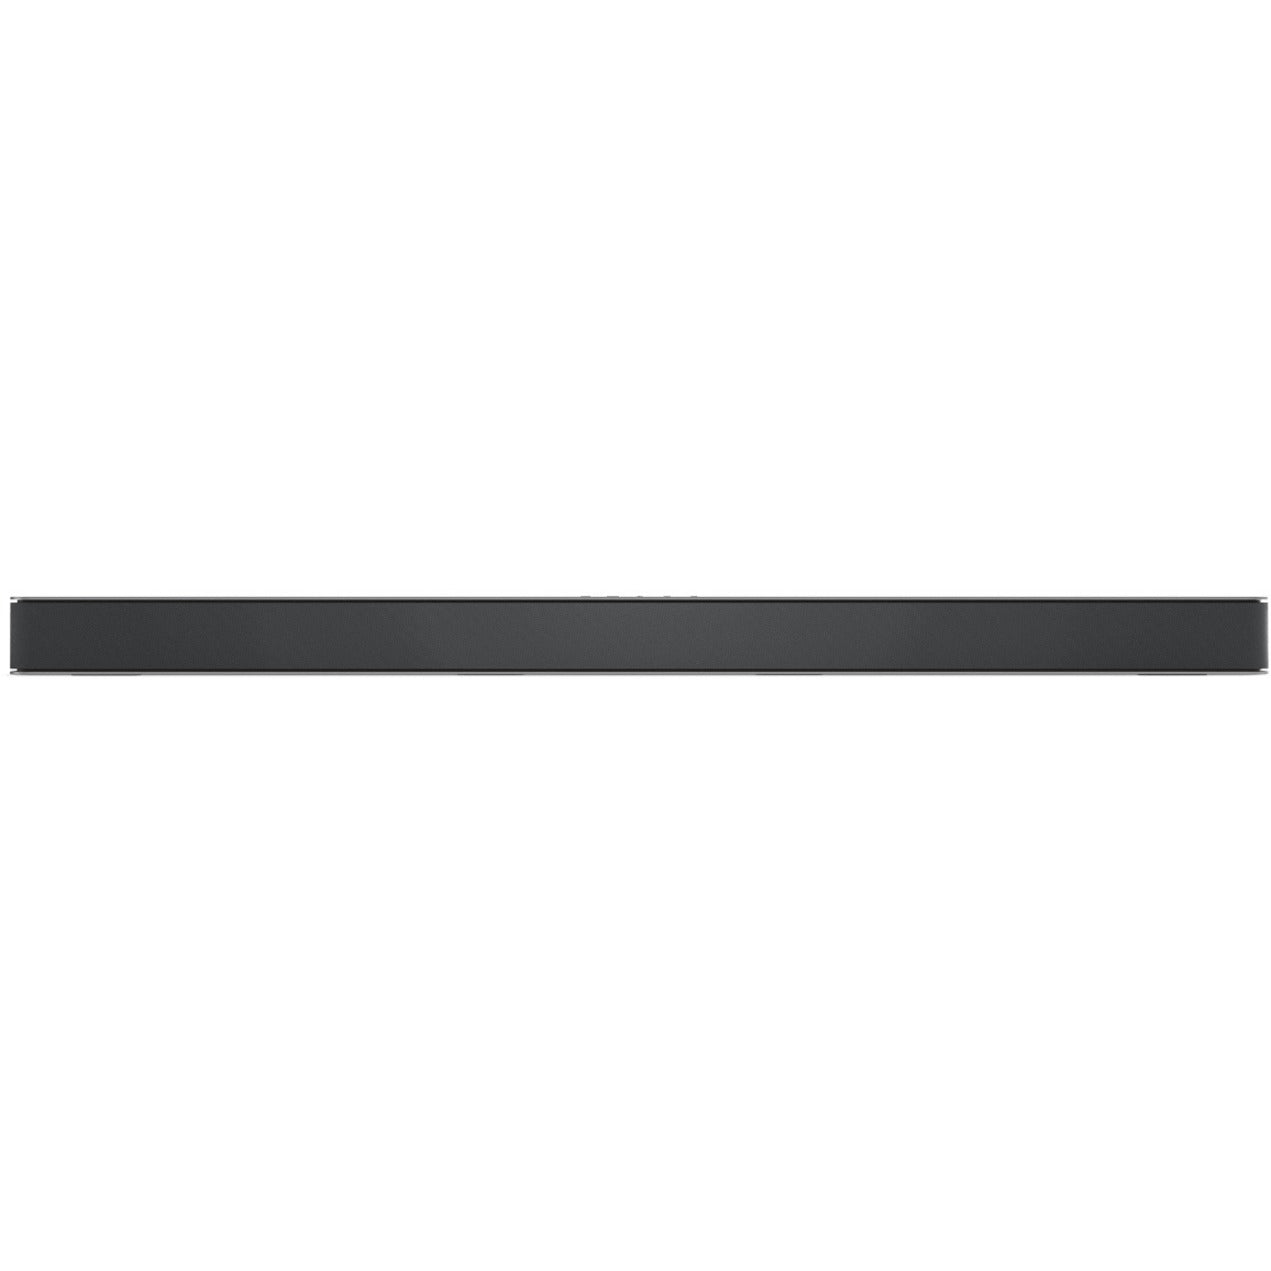 VIZIO M51AX-J6 M-Series 5.1 Home Theater Sound Bar with Dolby Atmos and DTS:X, Wireless Subwoofer, Surround Sound